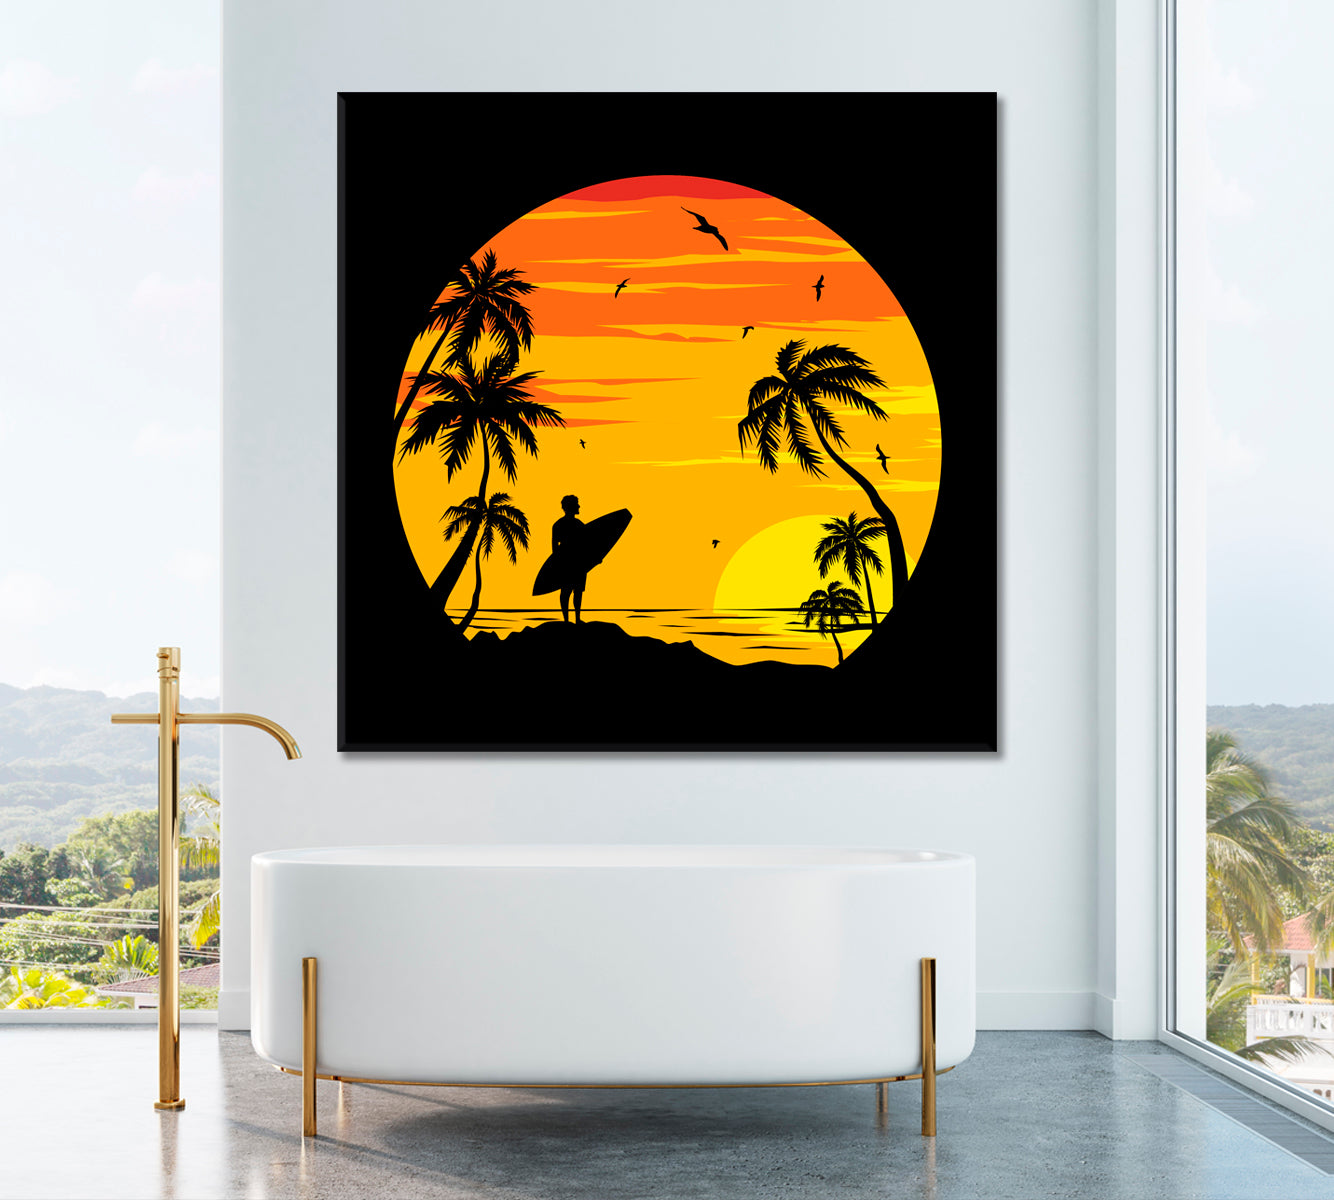 Surfer Silhouette at Sunset Canvas Print ArtLexy 1 Panel 12"x12" inches 